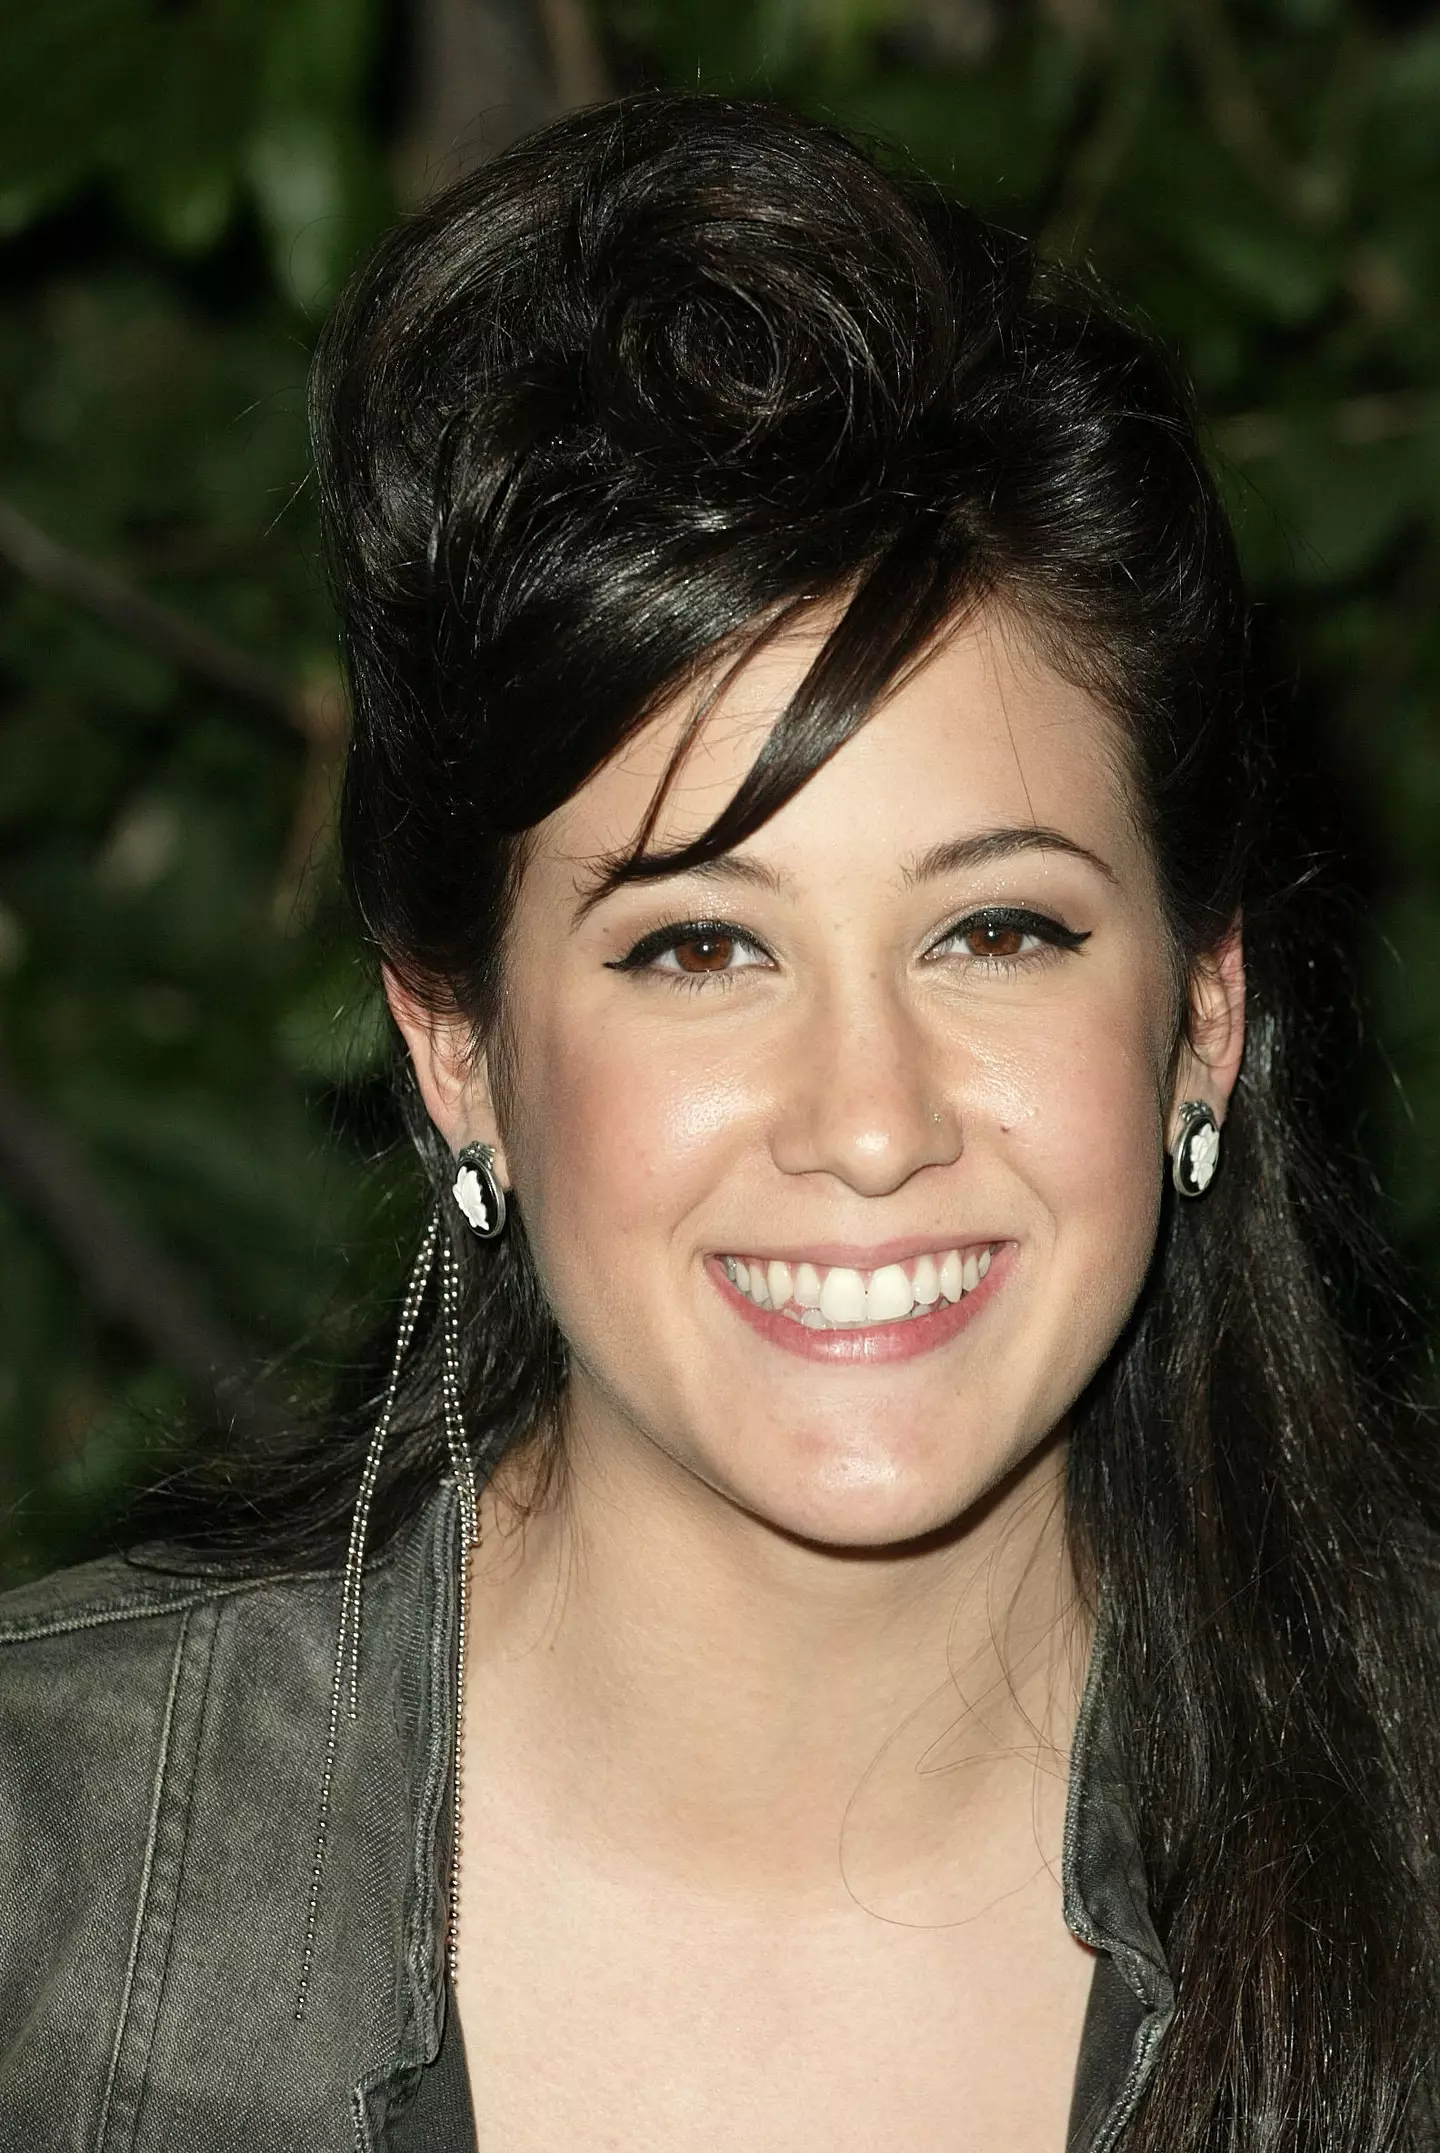 Vanessa Carlton was the start of Mayer's many relationships in the Noughties.